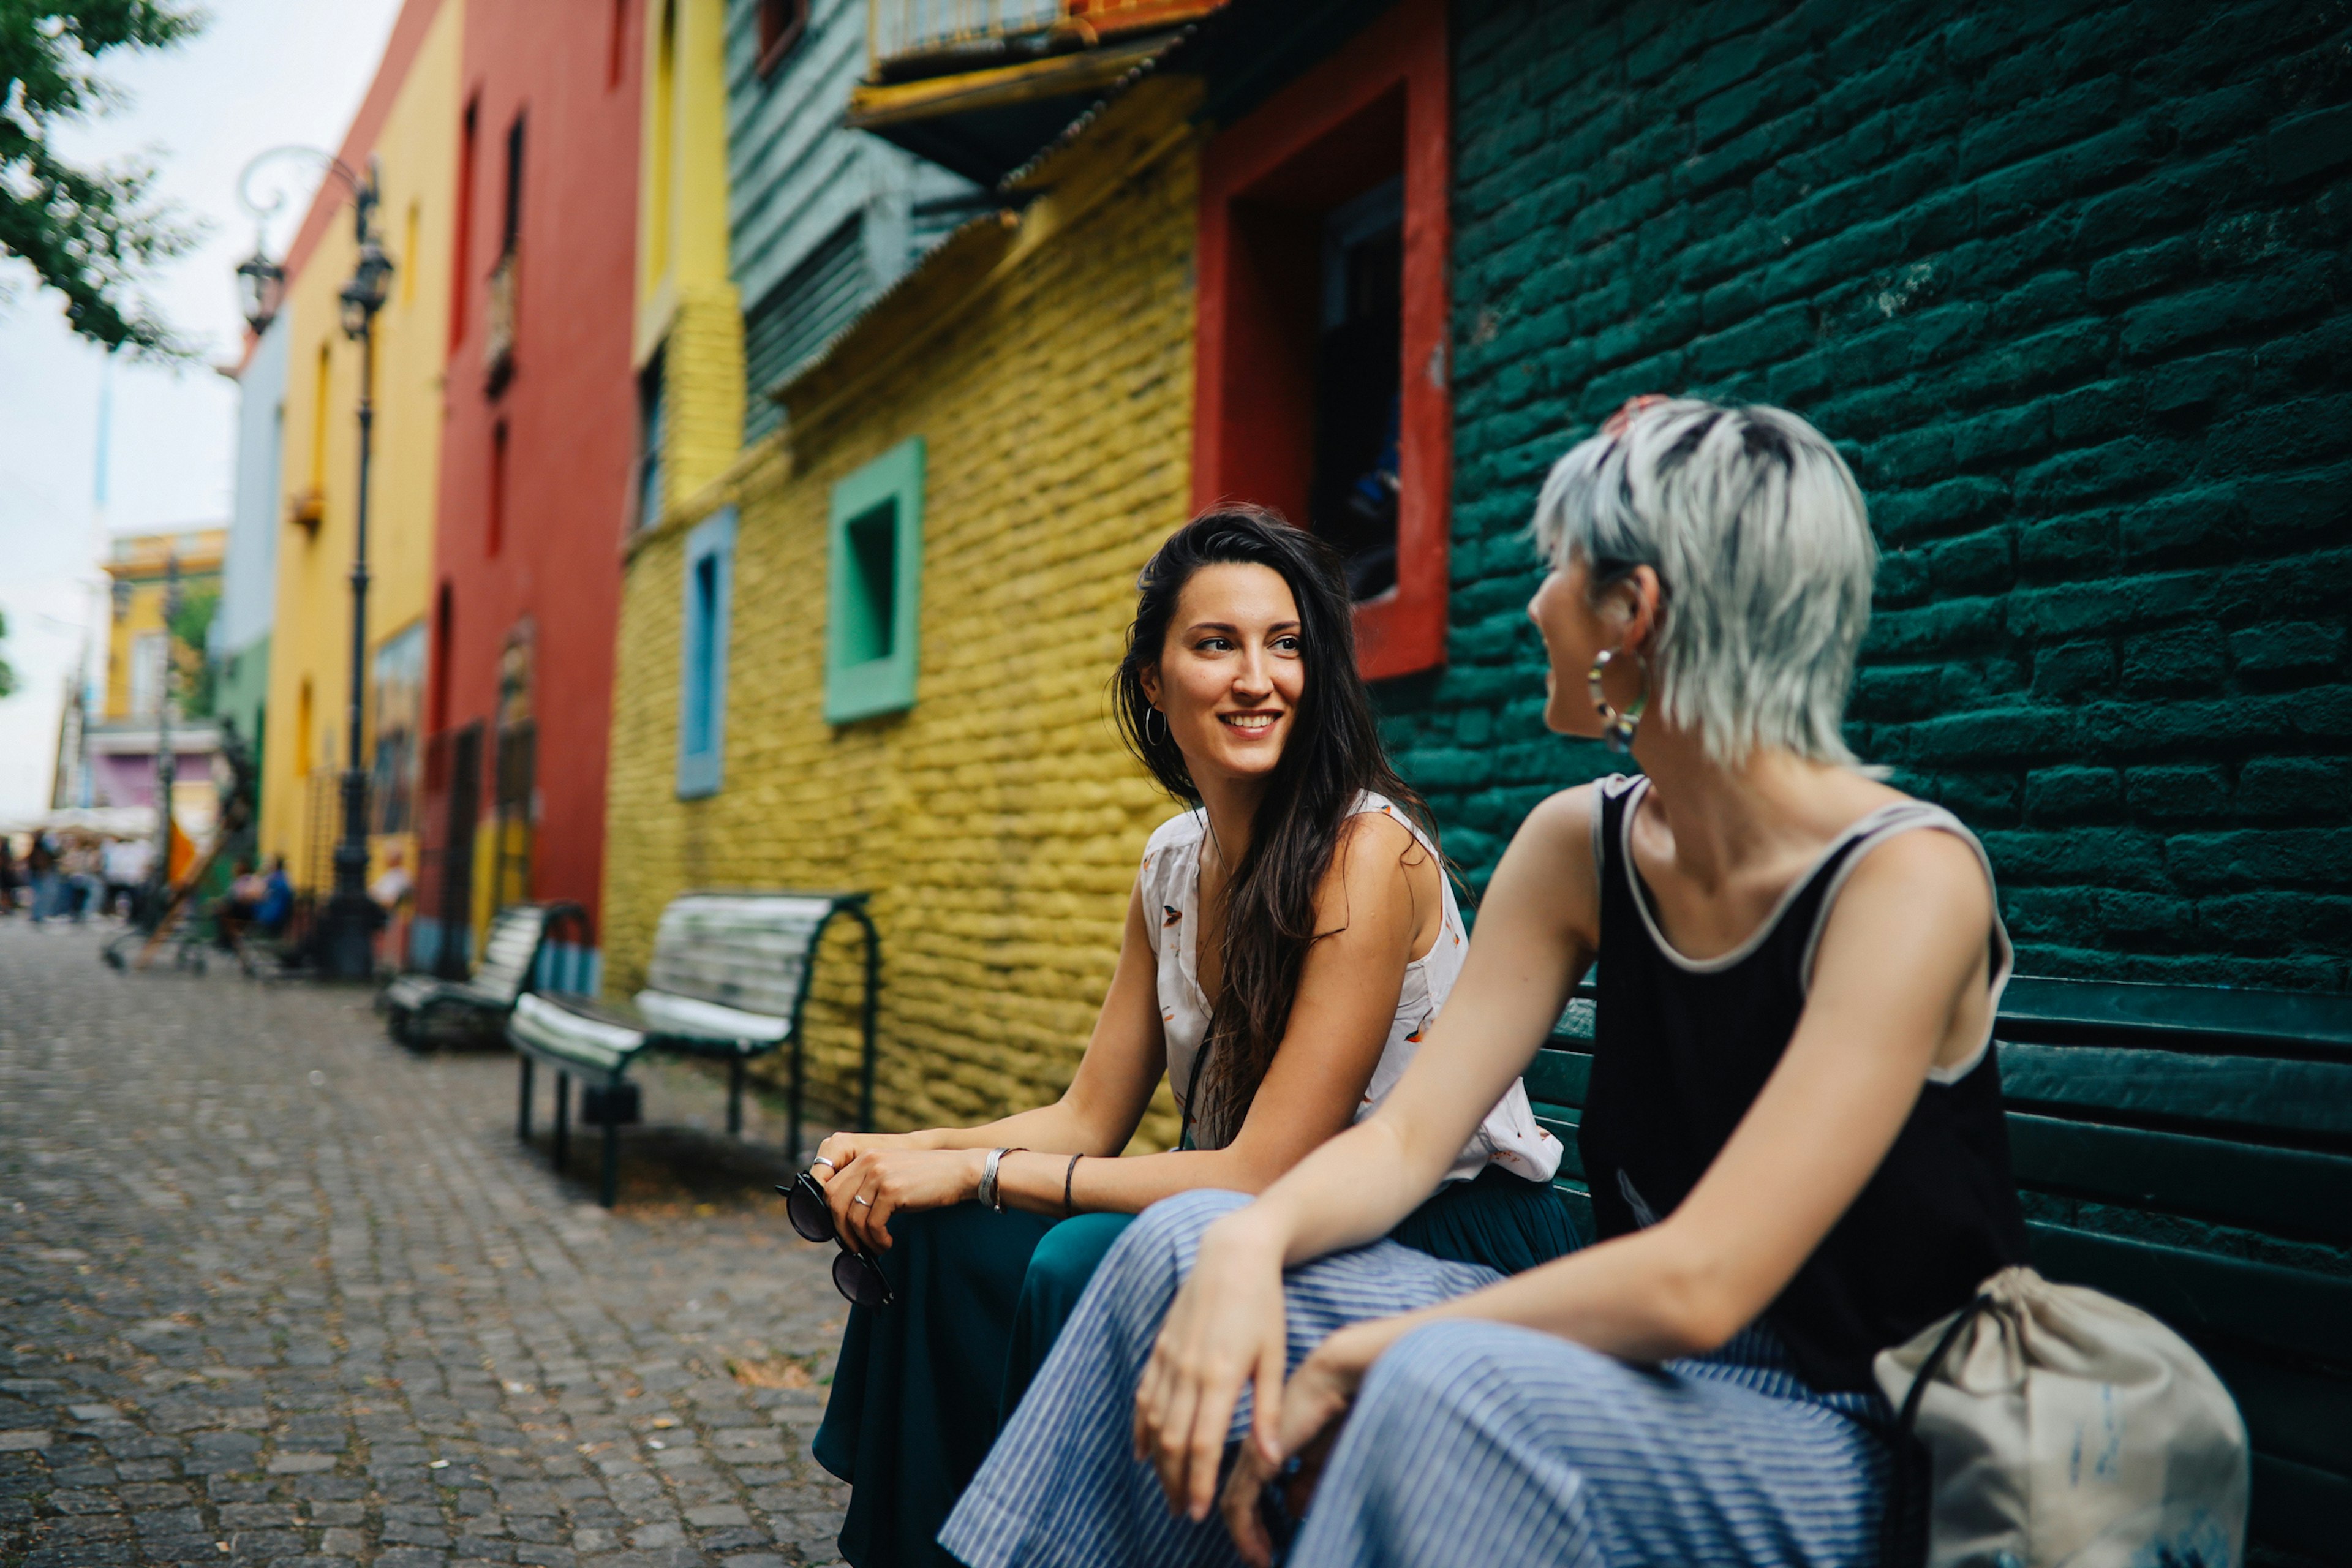 Two young women sitting in front of a colorful vintage house and talking, Buenos Aires, Argentina.
1196428949